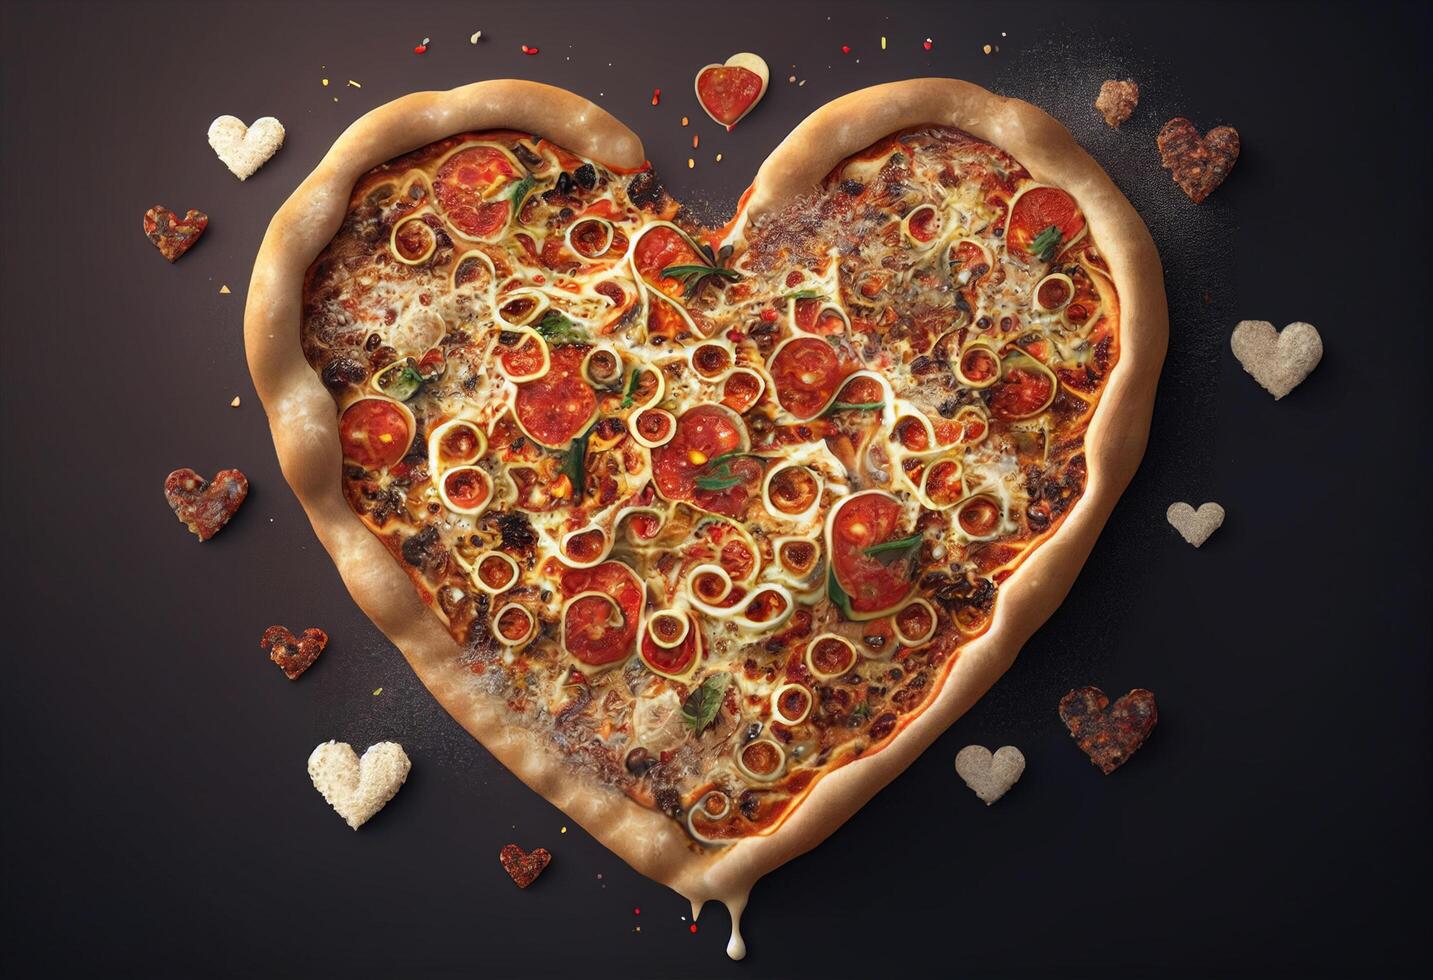 Heart shaped pizza with pepperoni, salami and mozzarella on dark background photo